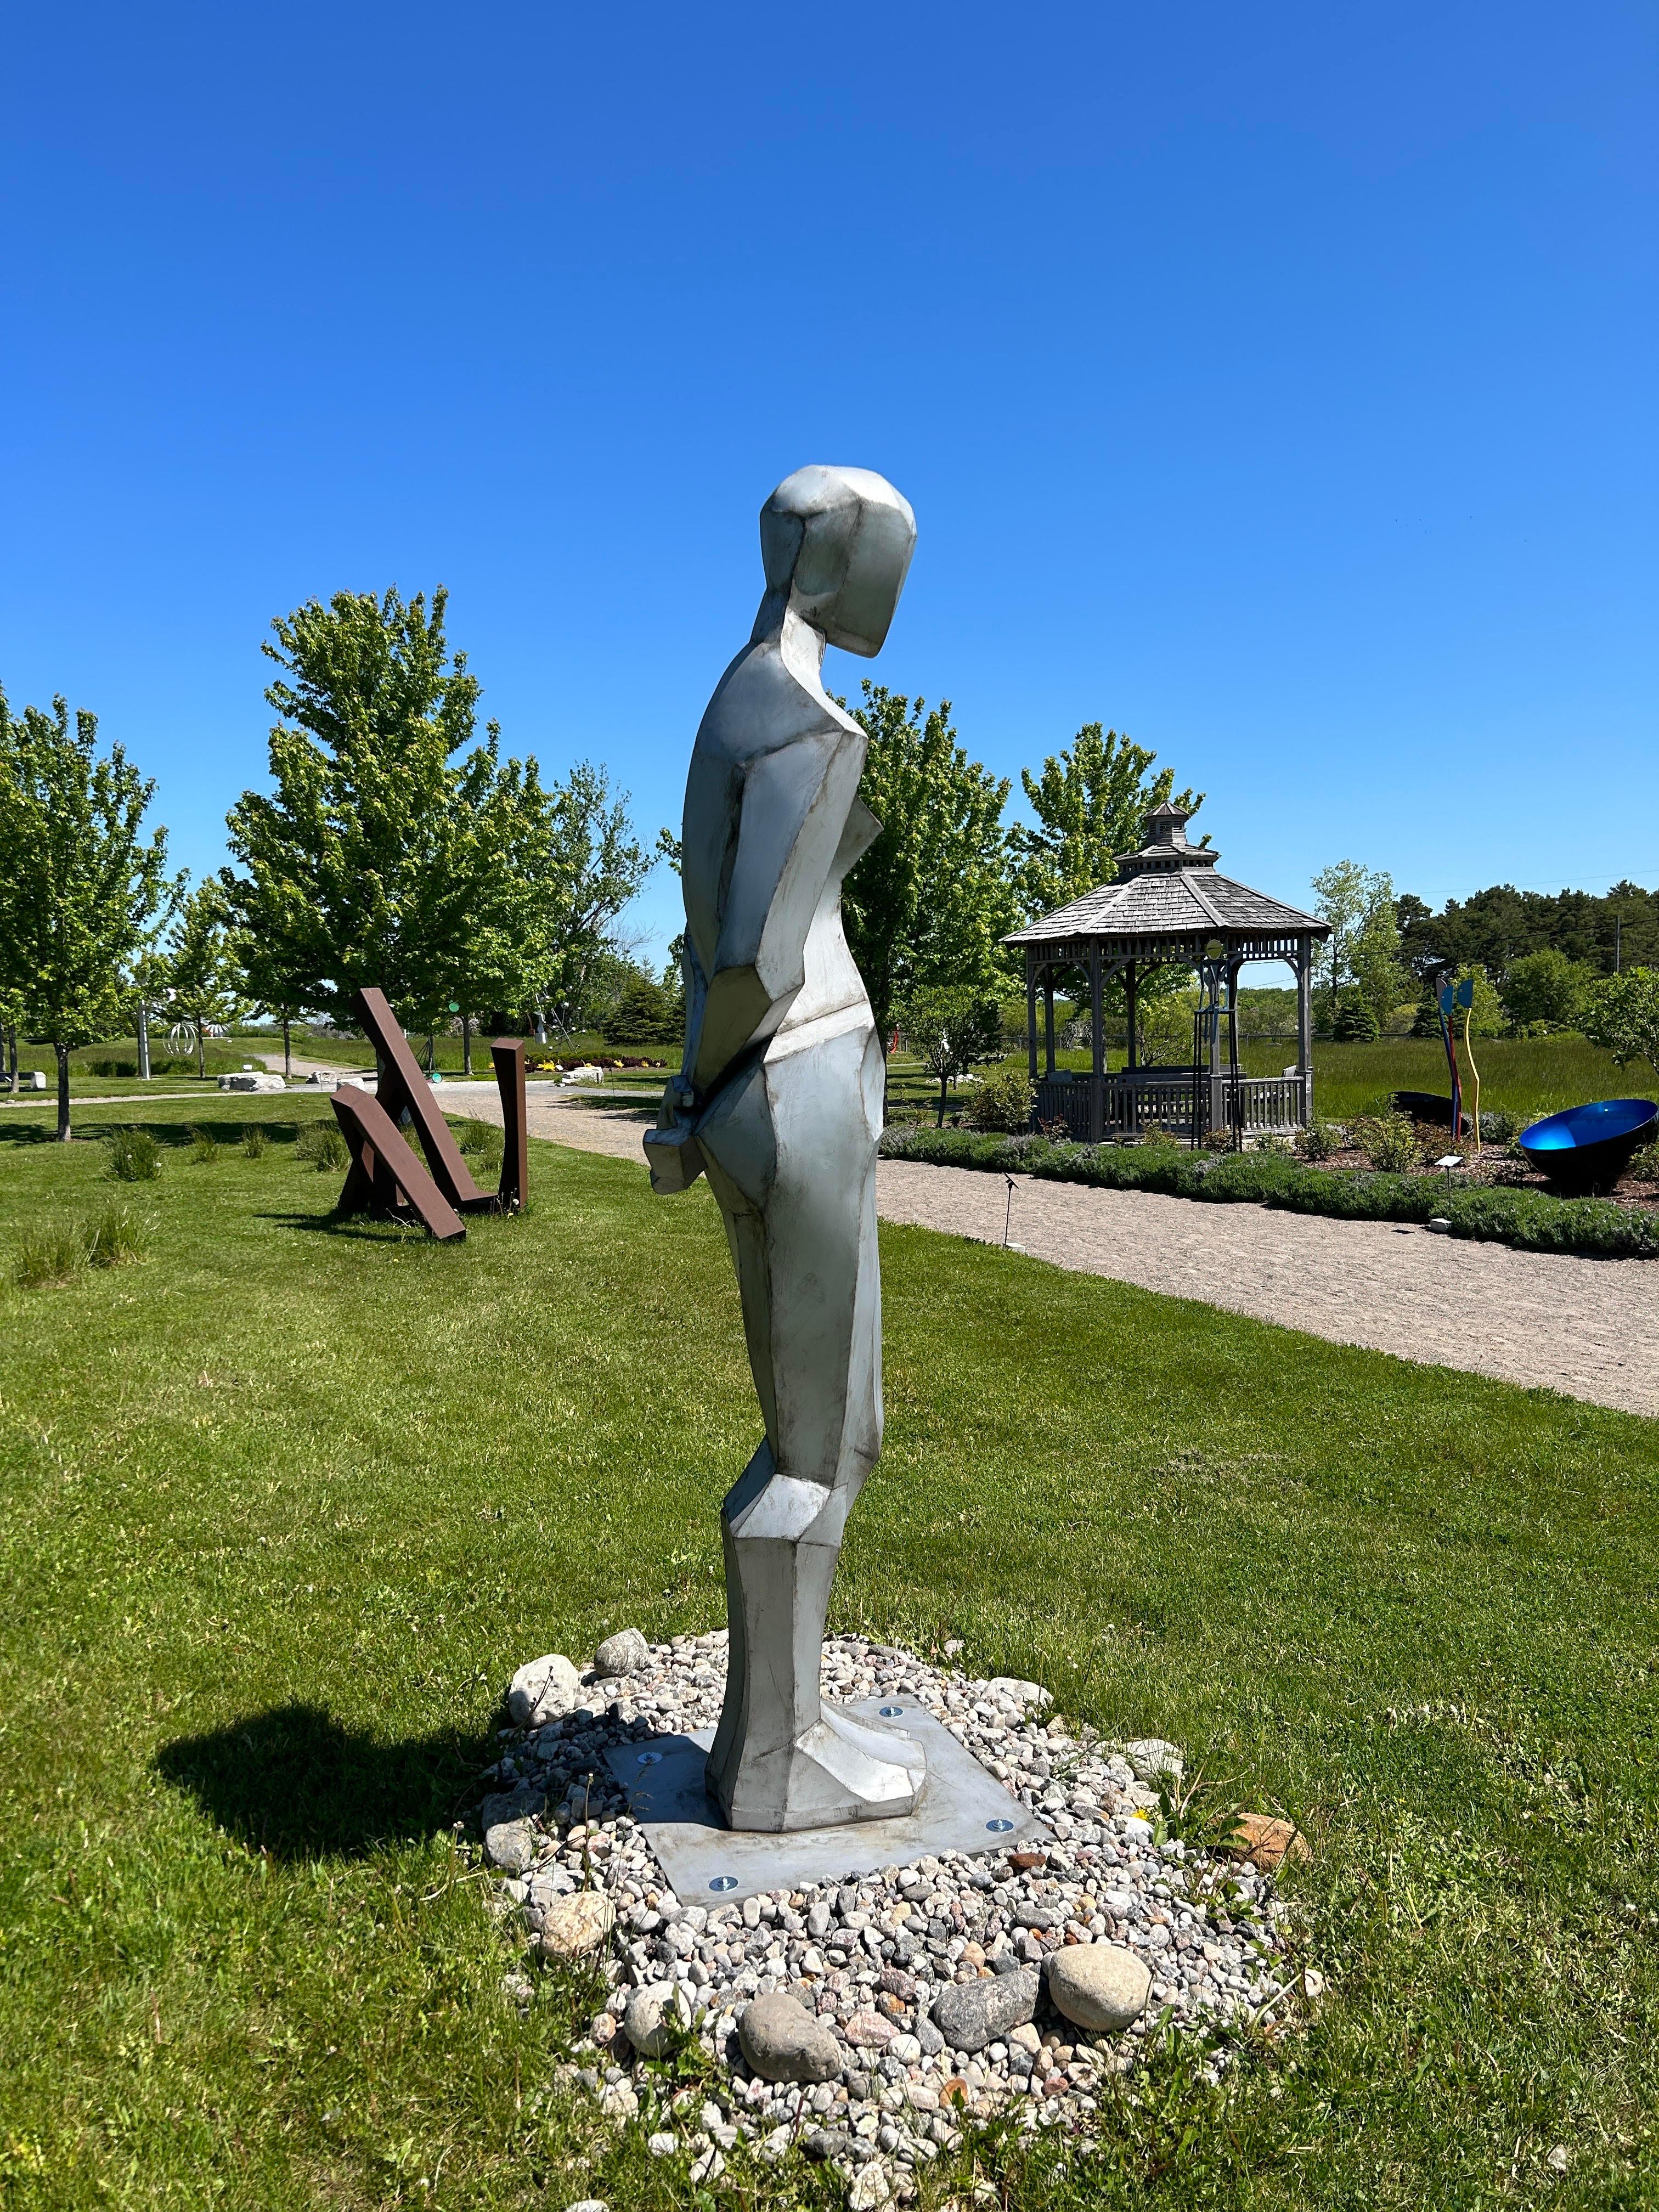 The striking angles of the female figure are captured in this abstract outdoor sculpture by Galina Stetco. The young Quebec based artist works as both a sculptor and a painter. This imposing piece created in stainless steel is of a woman standing,